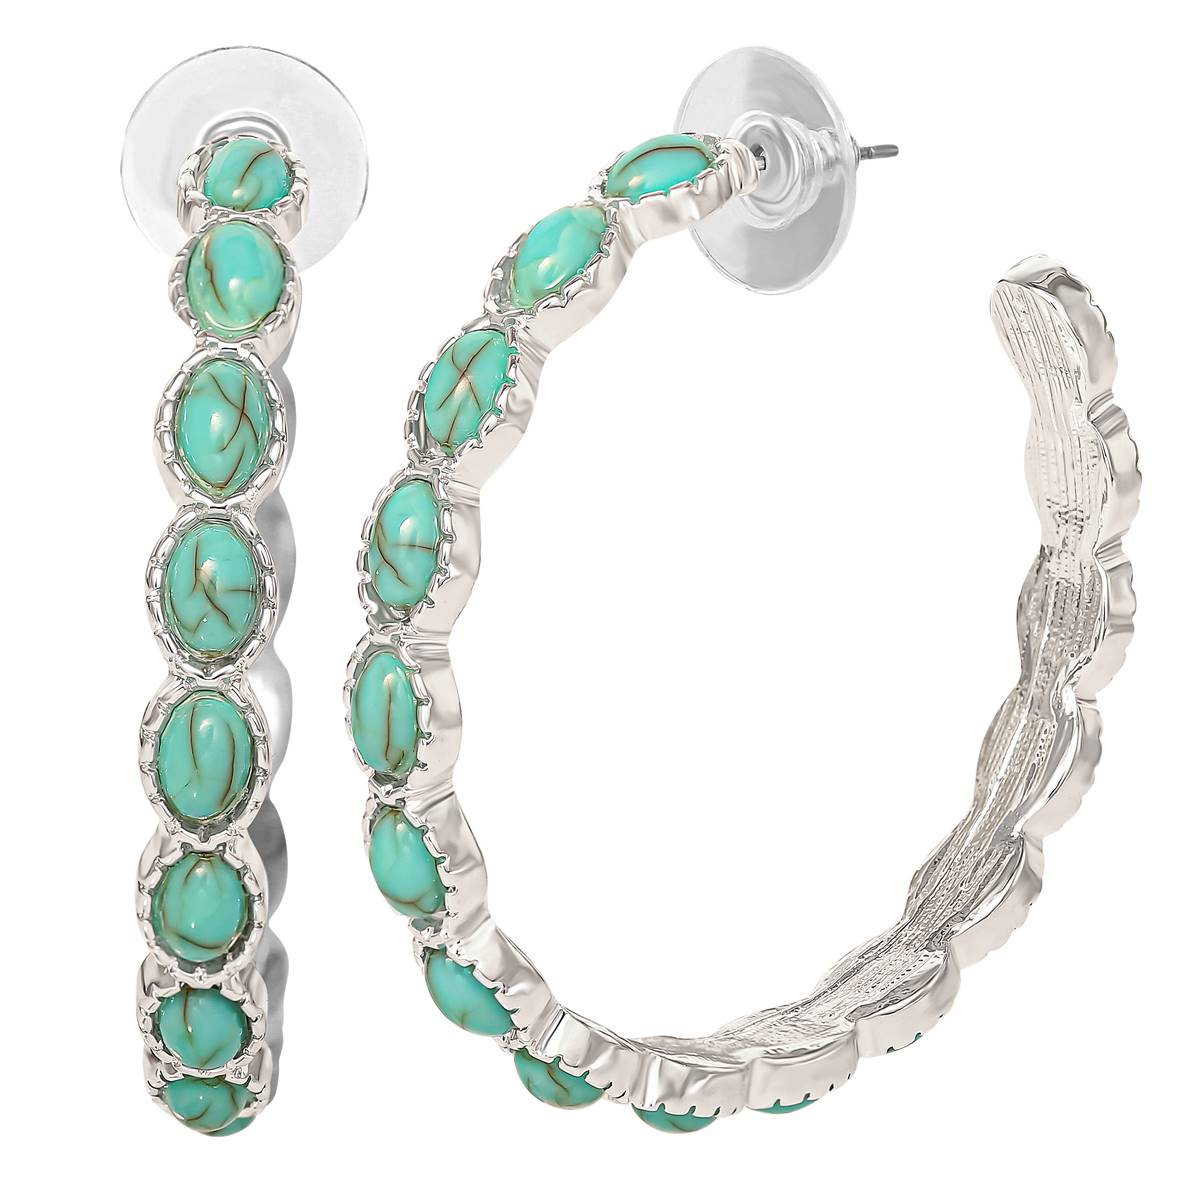 Jessica Simpson Reconstituted Turquoise Stone Hoop Earrings